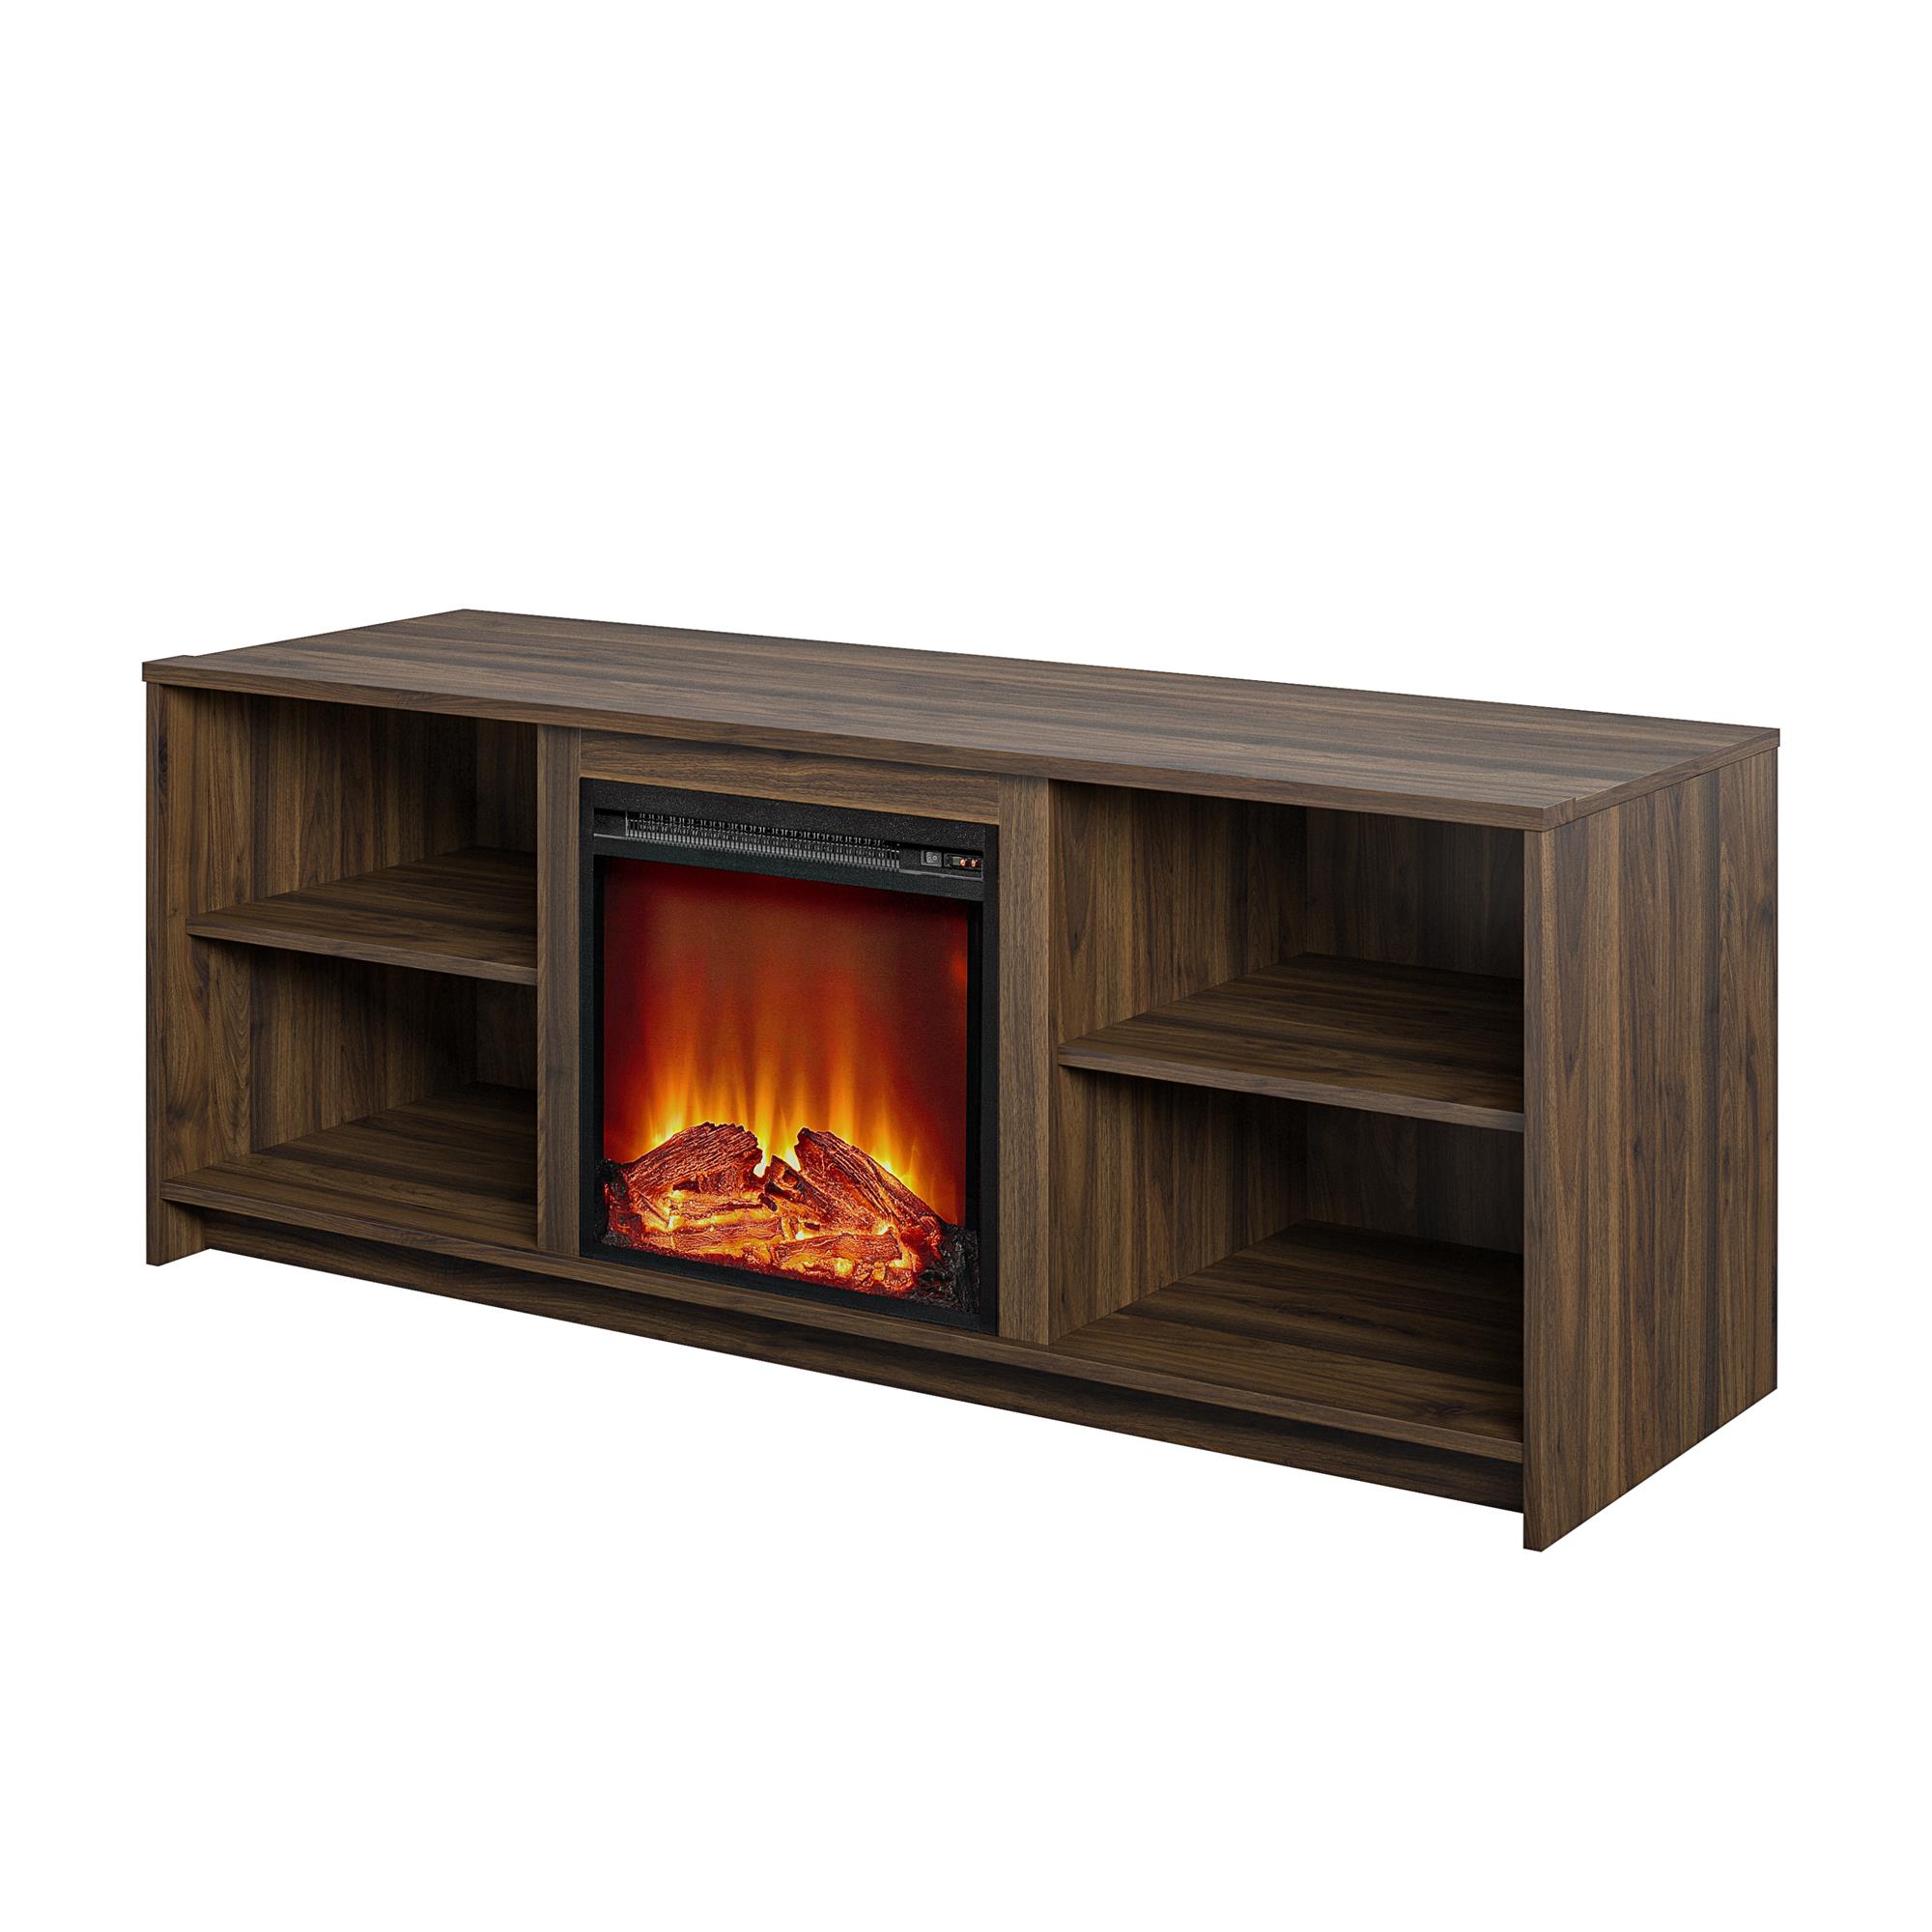 Mainstays Fireplace TV Stand for TVs up to 65", Walnut - image 4 of 11